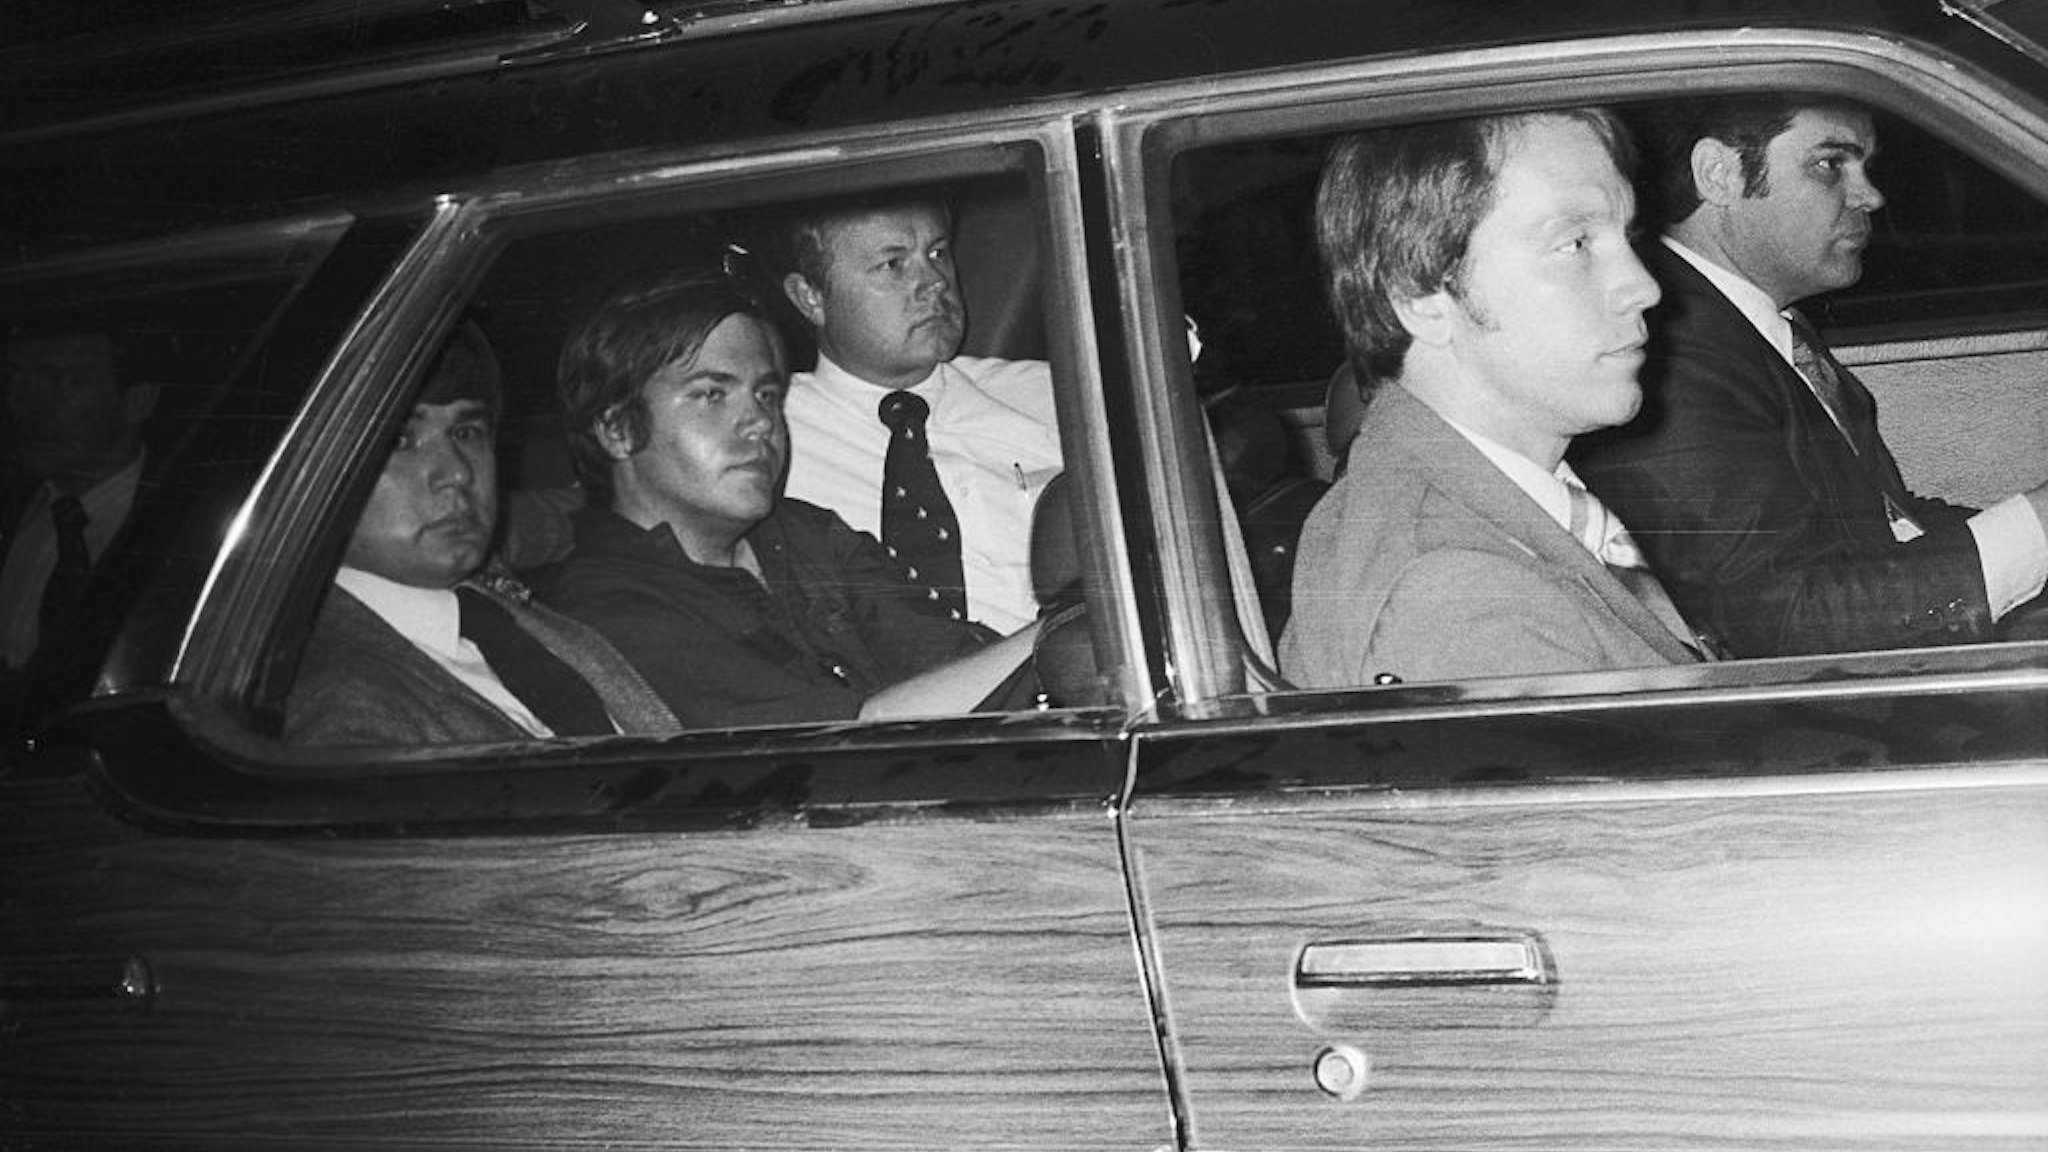 4/10/81-Washington, DC: John Hinckley, Jr. (center), the man charged with the attempted murder of President Reagan, now finds himself the center of Federal protection, March 30th, as he is driven away from U.S. District Court. Hinckley was seated in the center seat of a nine-seat section station with agents assigned to protect him, seated in front, alongside, and behind him. Ph: John Full